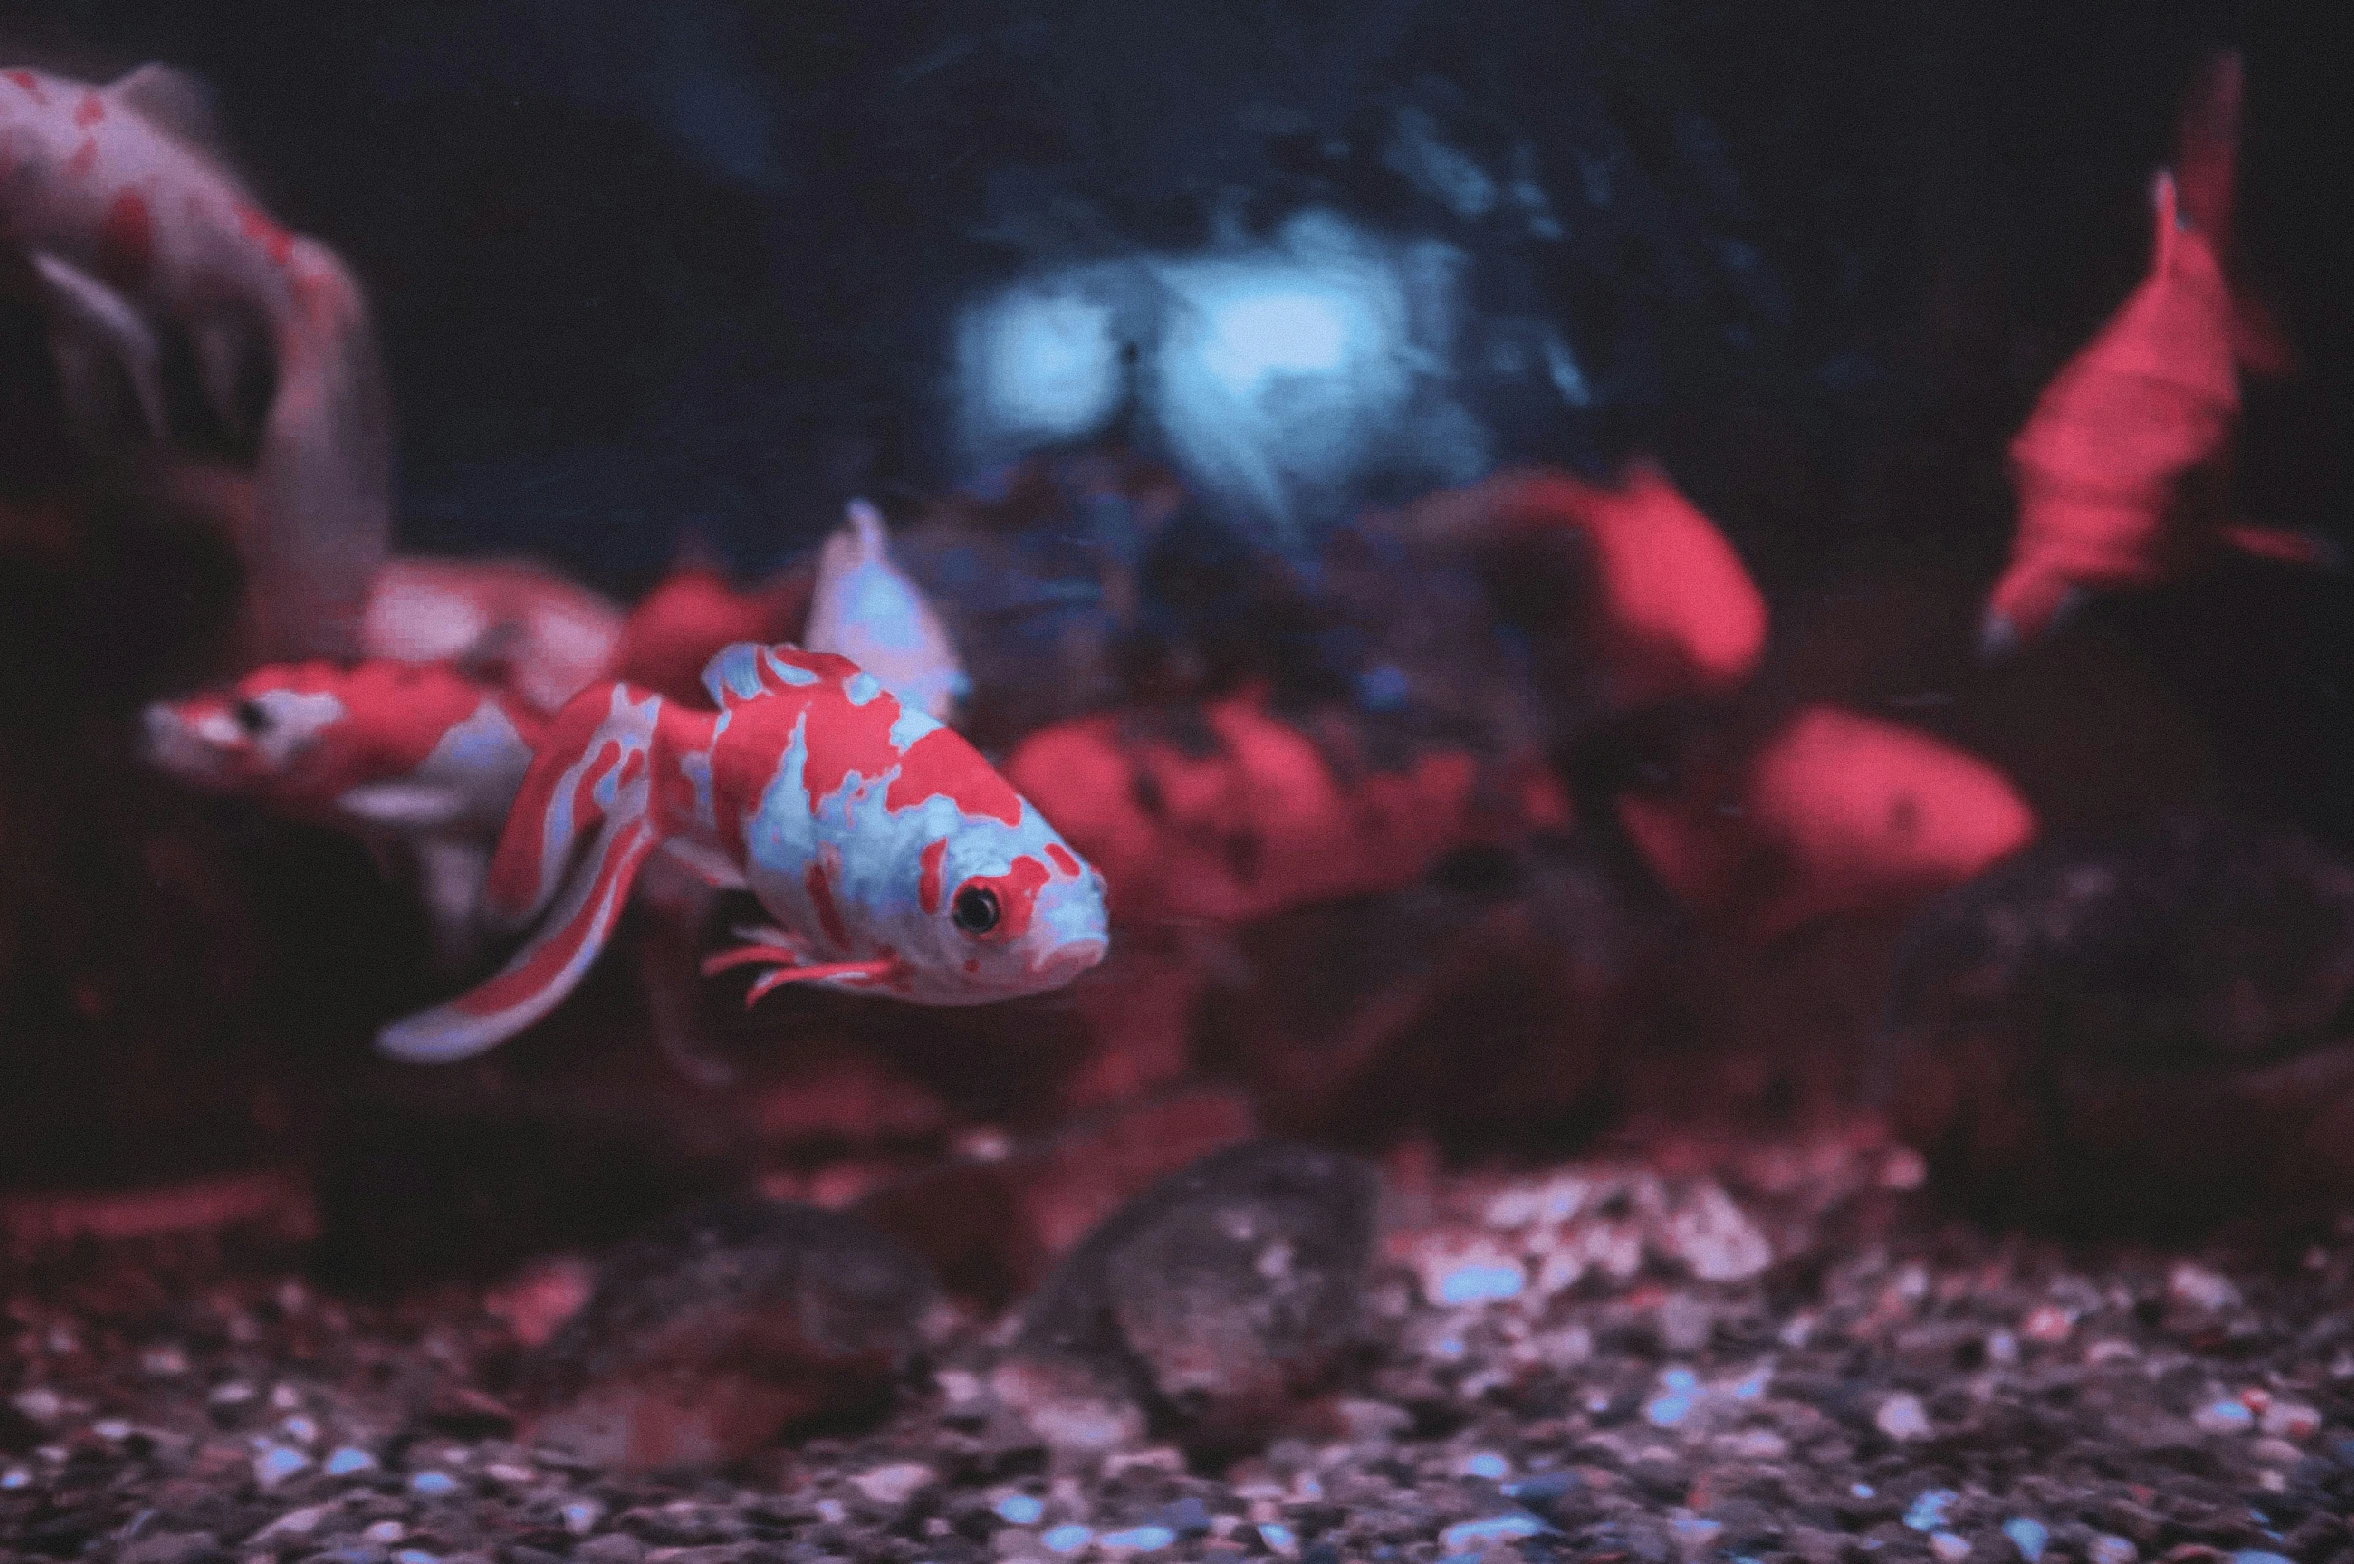 this fish has spots and is red